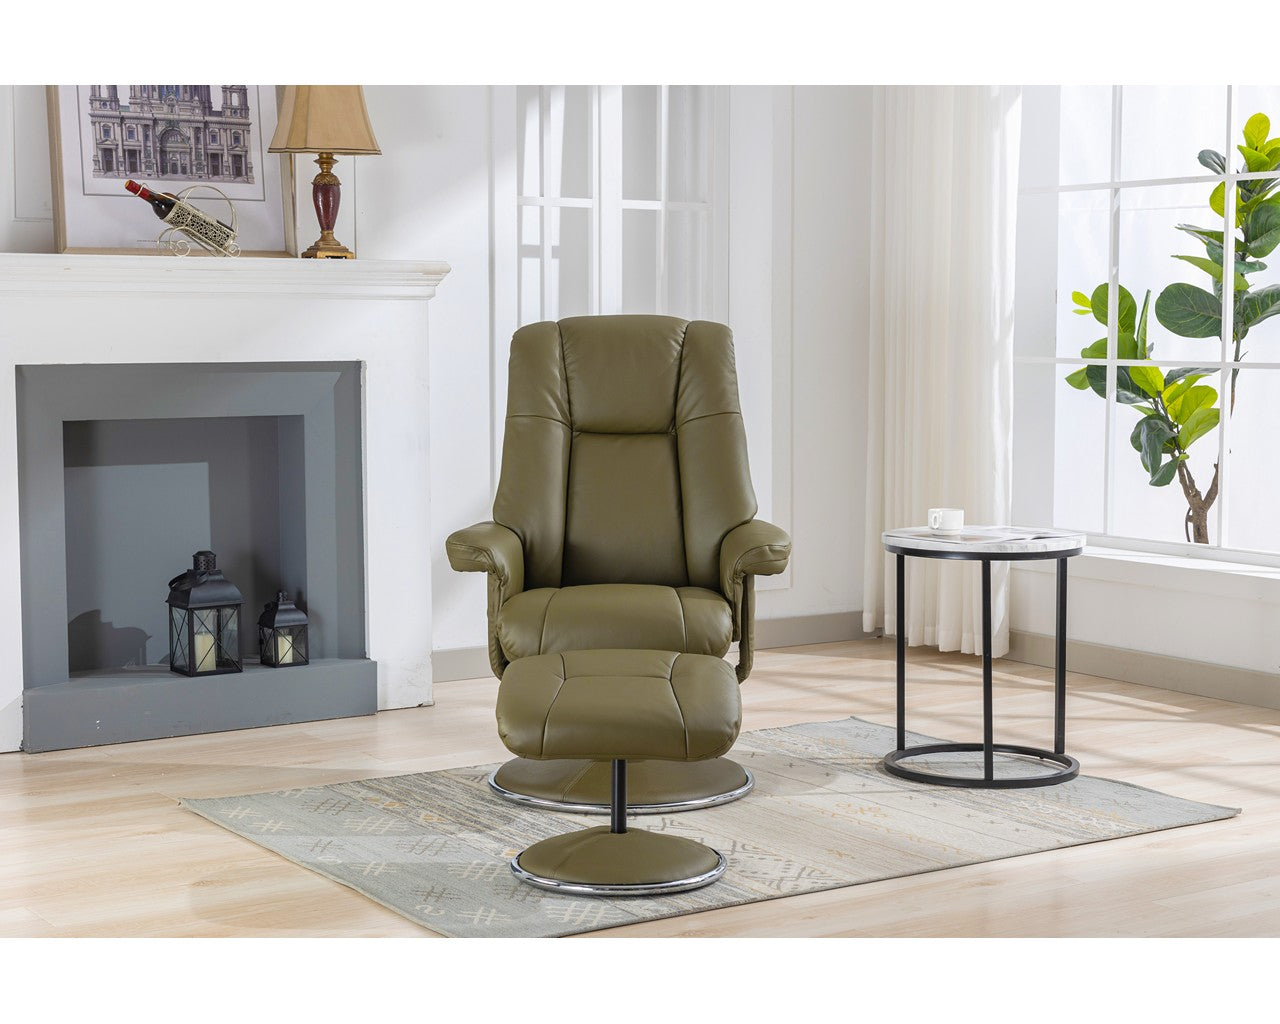 Swivel Recliner Chair Collection - Denver: Olive Green Leather